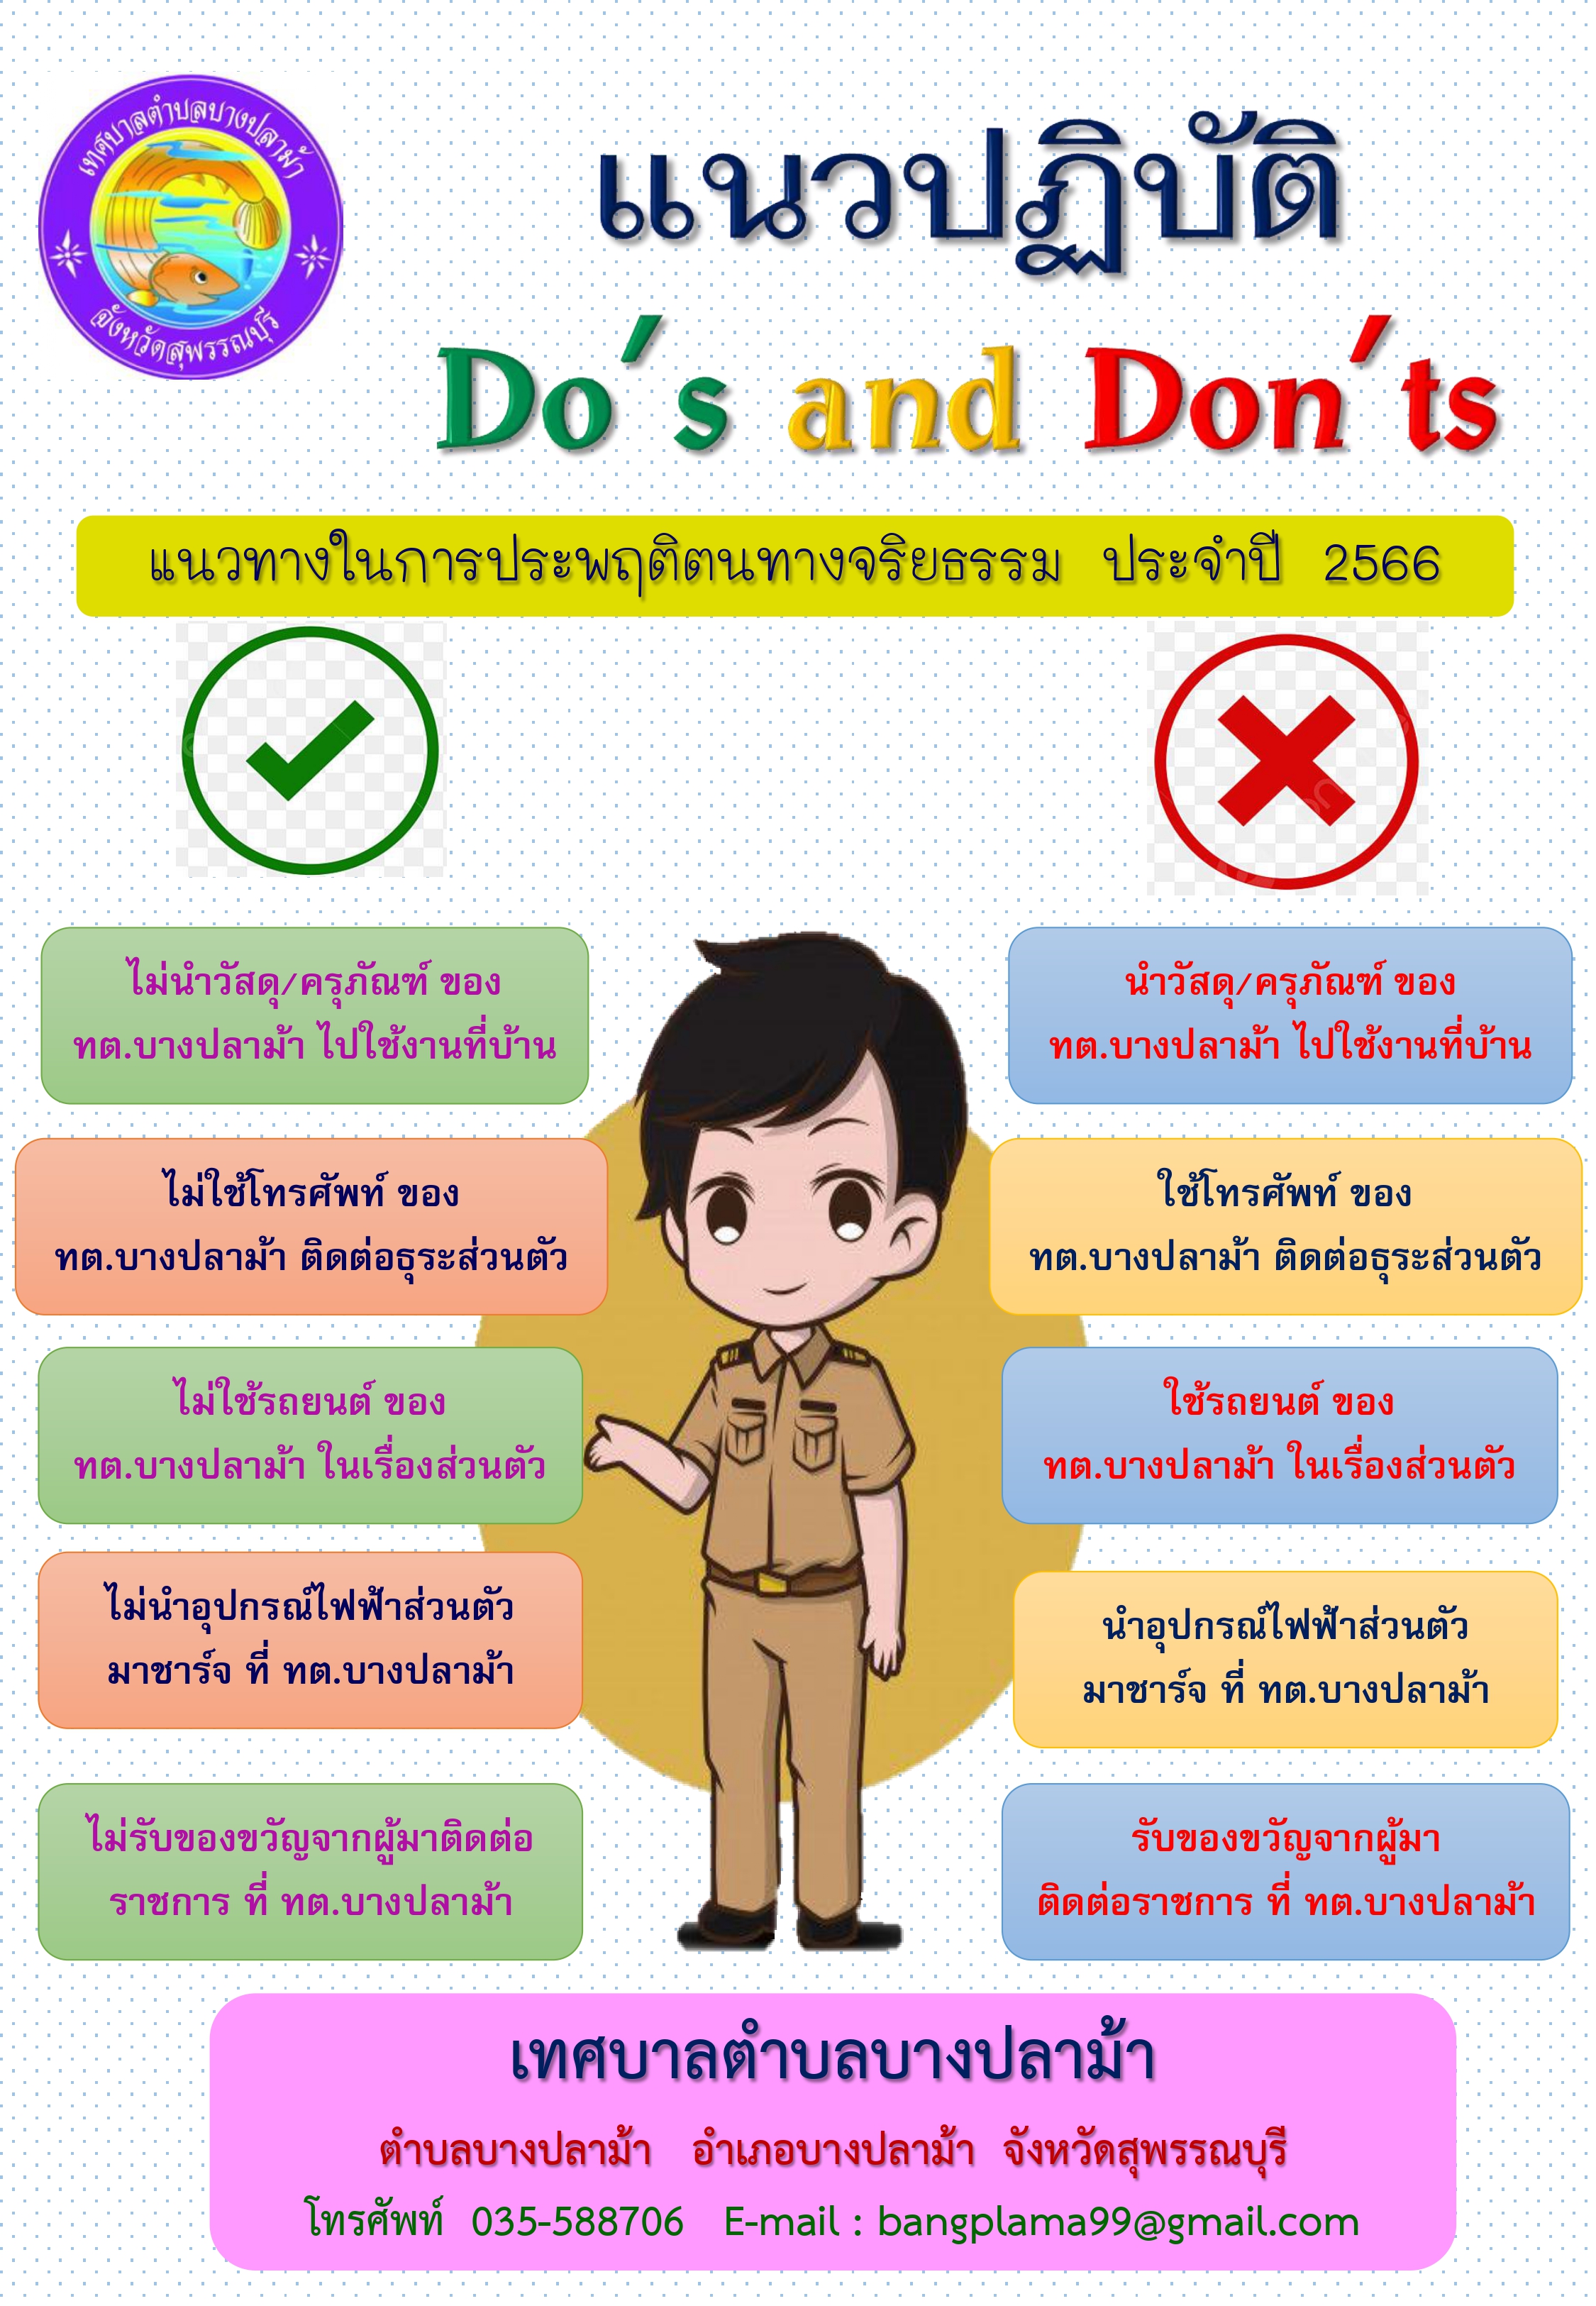 2.Do’s  and  Don’ts page 0001